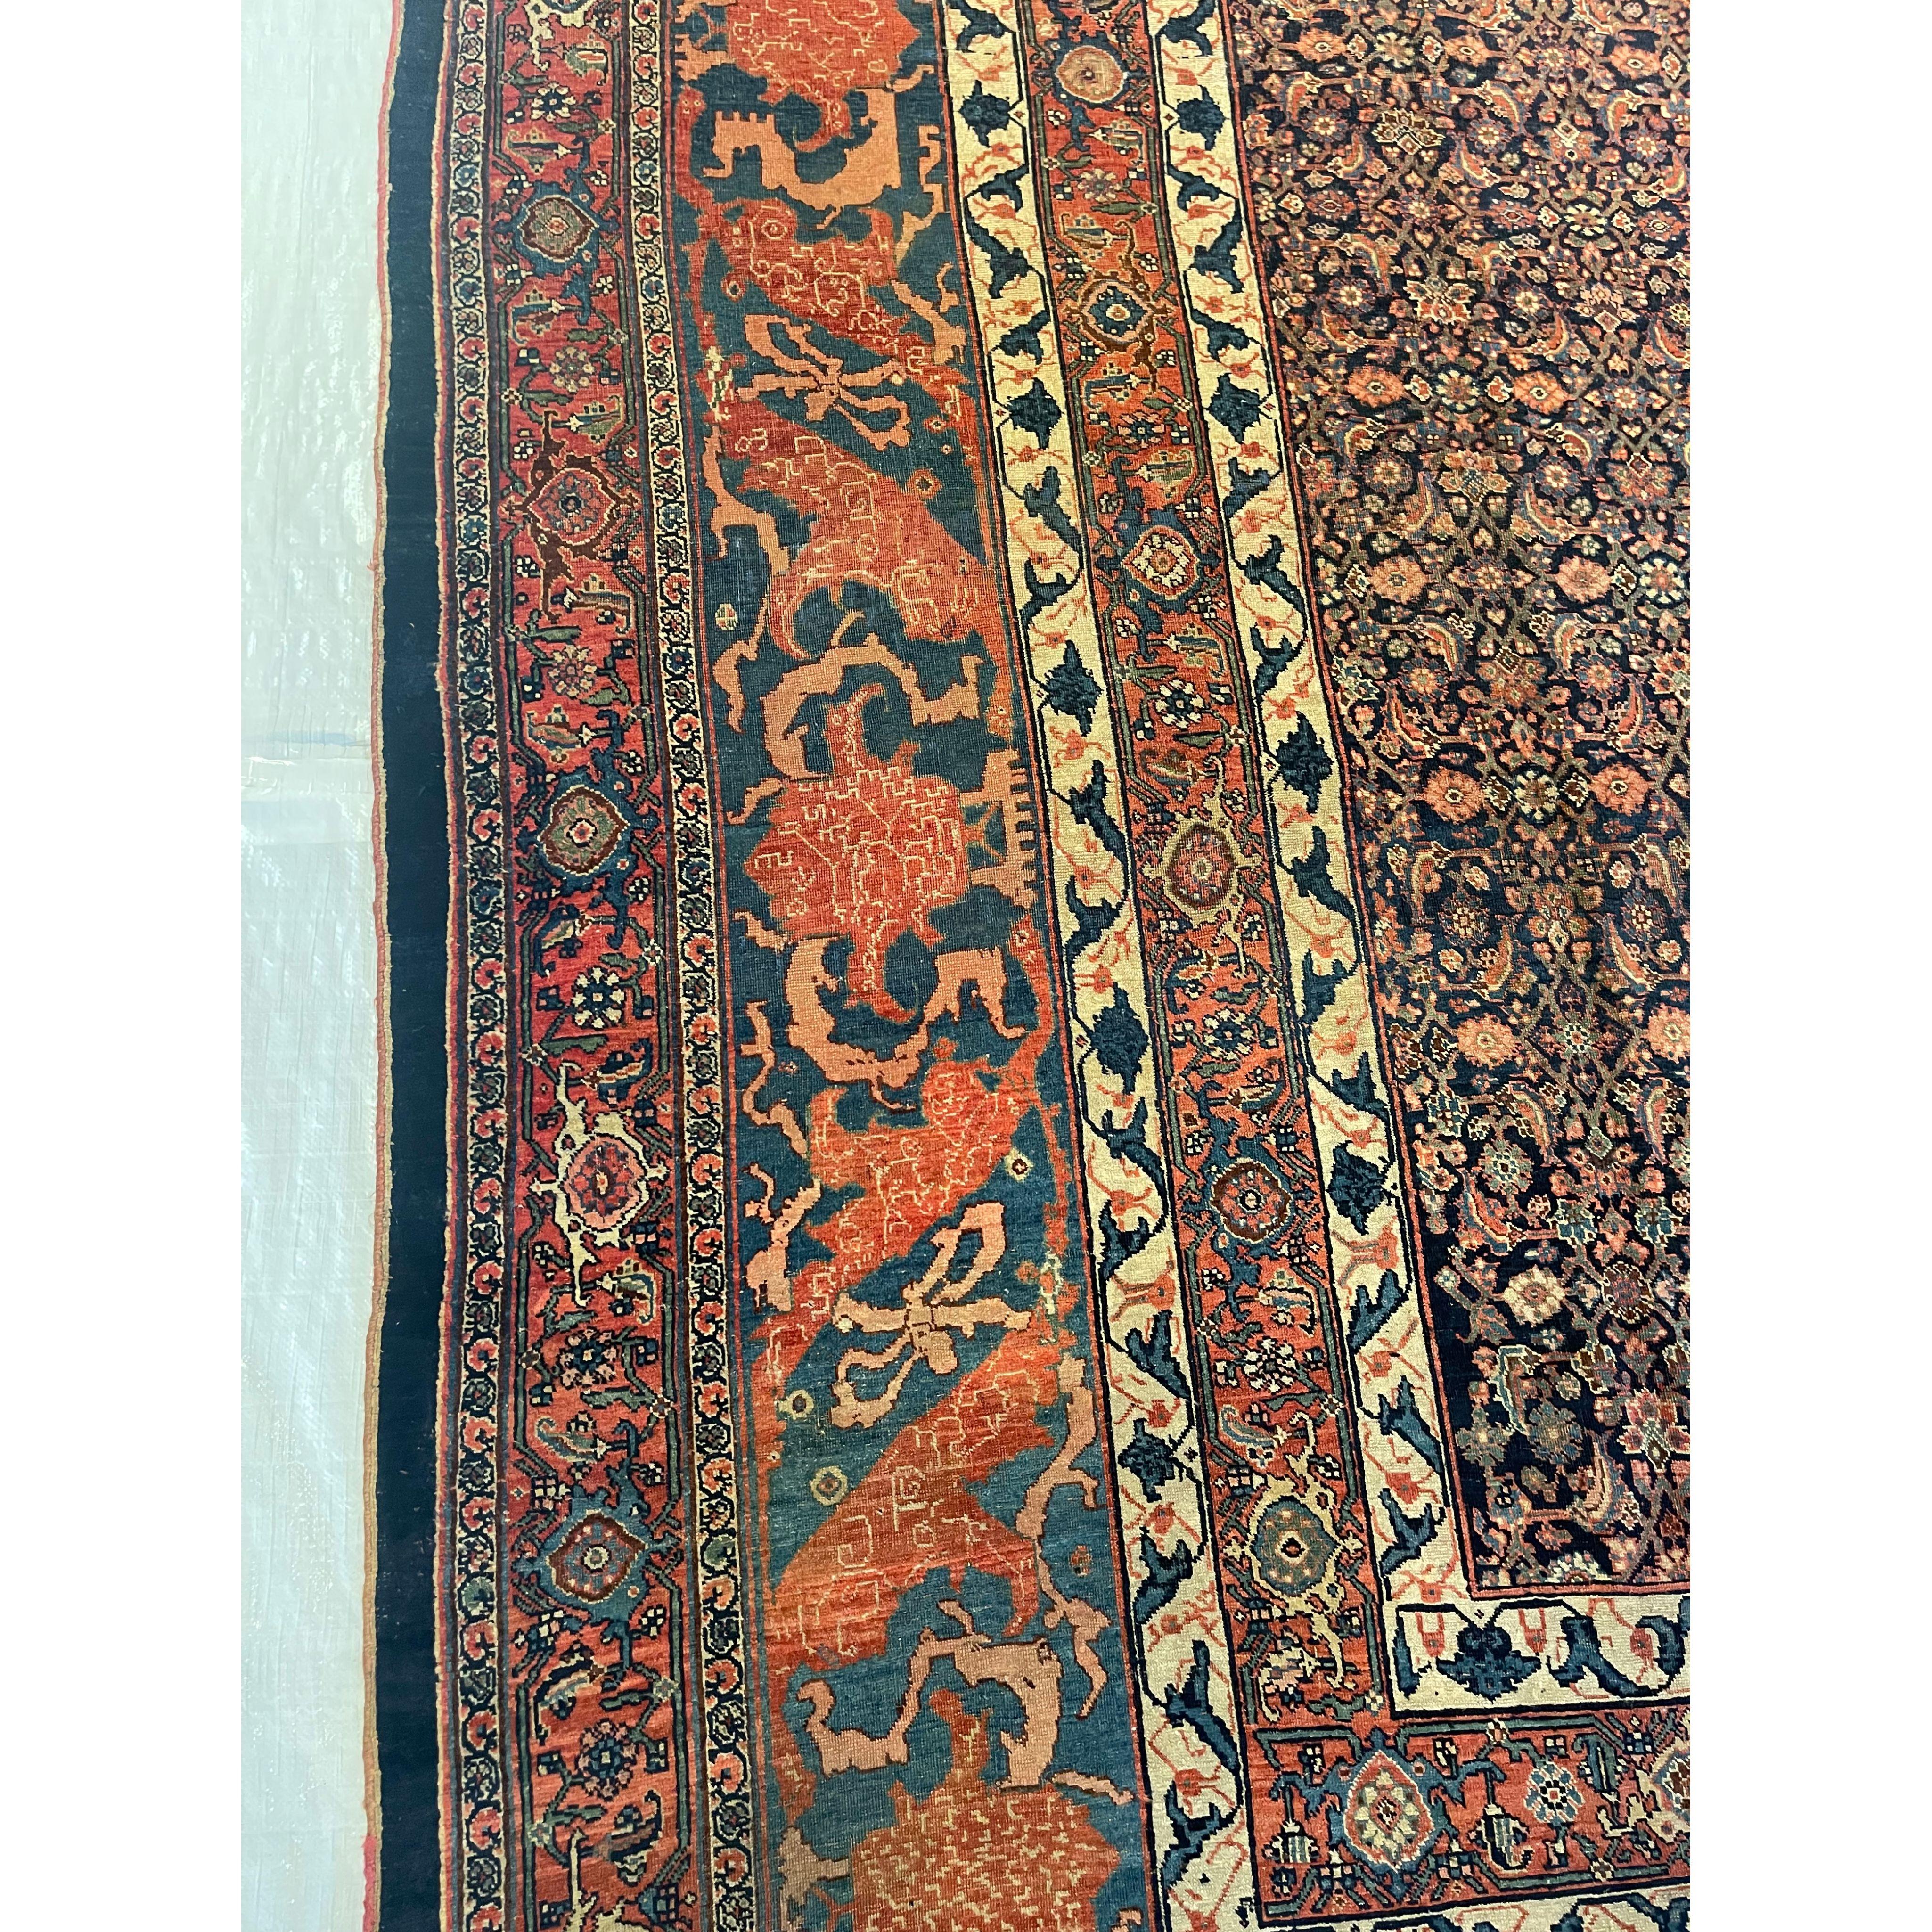 Antique Bidjar Rugs Bidjar is a town in Persian Kurdistan located in north-west Persia. The Bidjar name is also used to describe the antique rugs that were produced in the many villages in the surrounding vicinity. The Bidjar is noted as being the